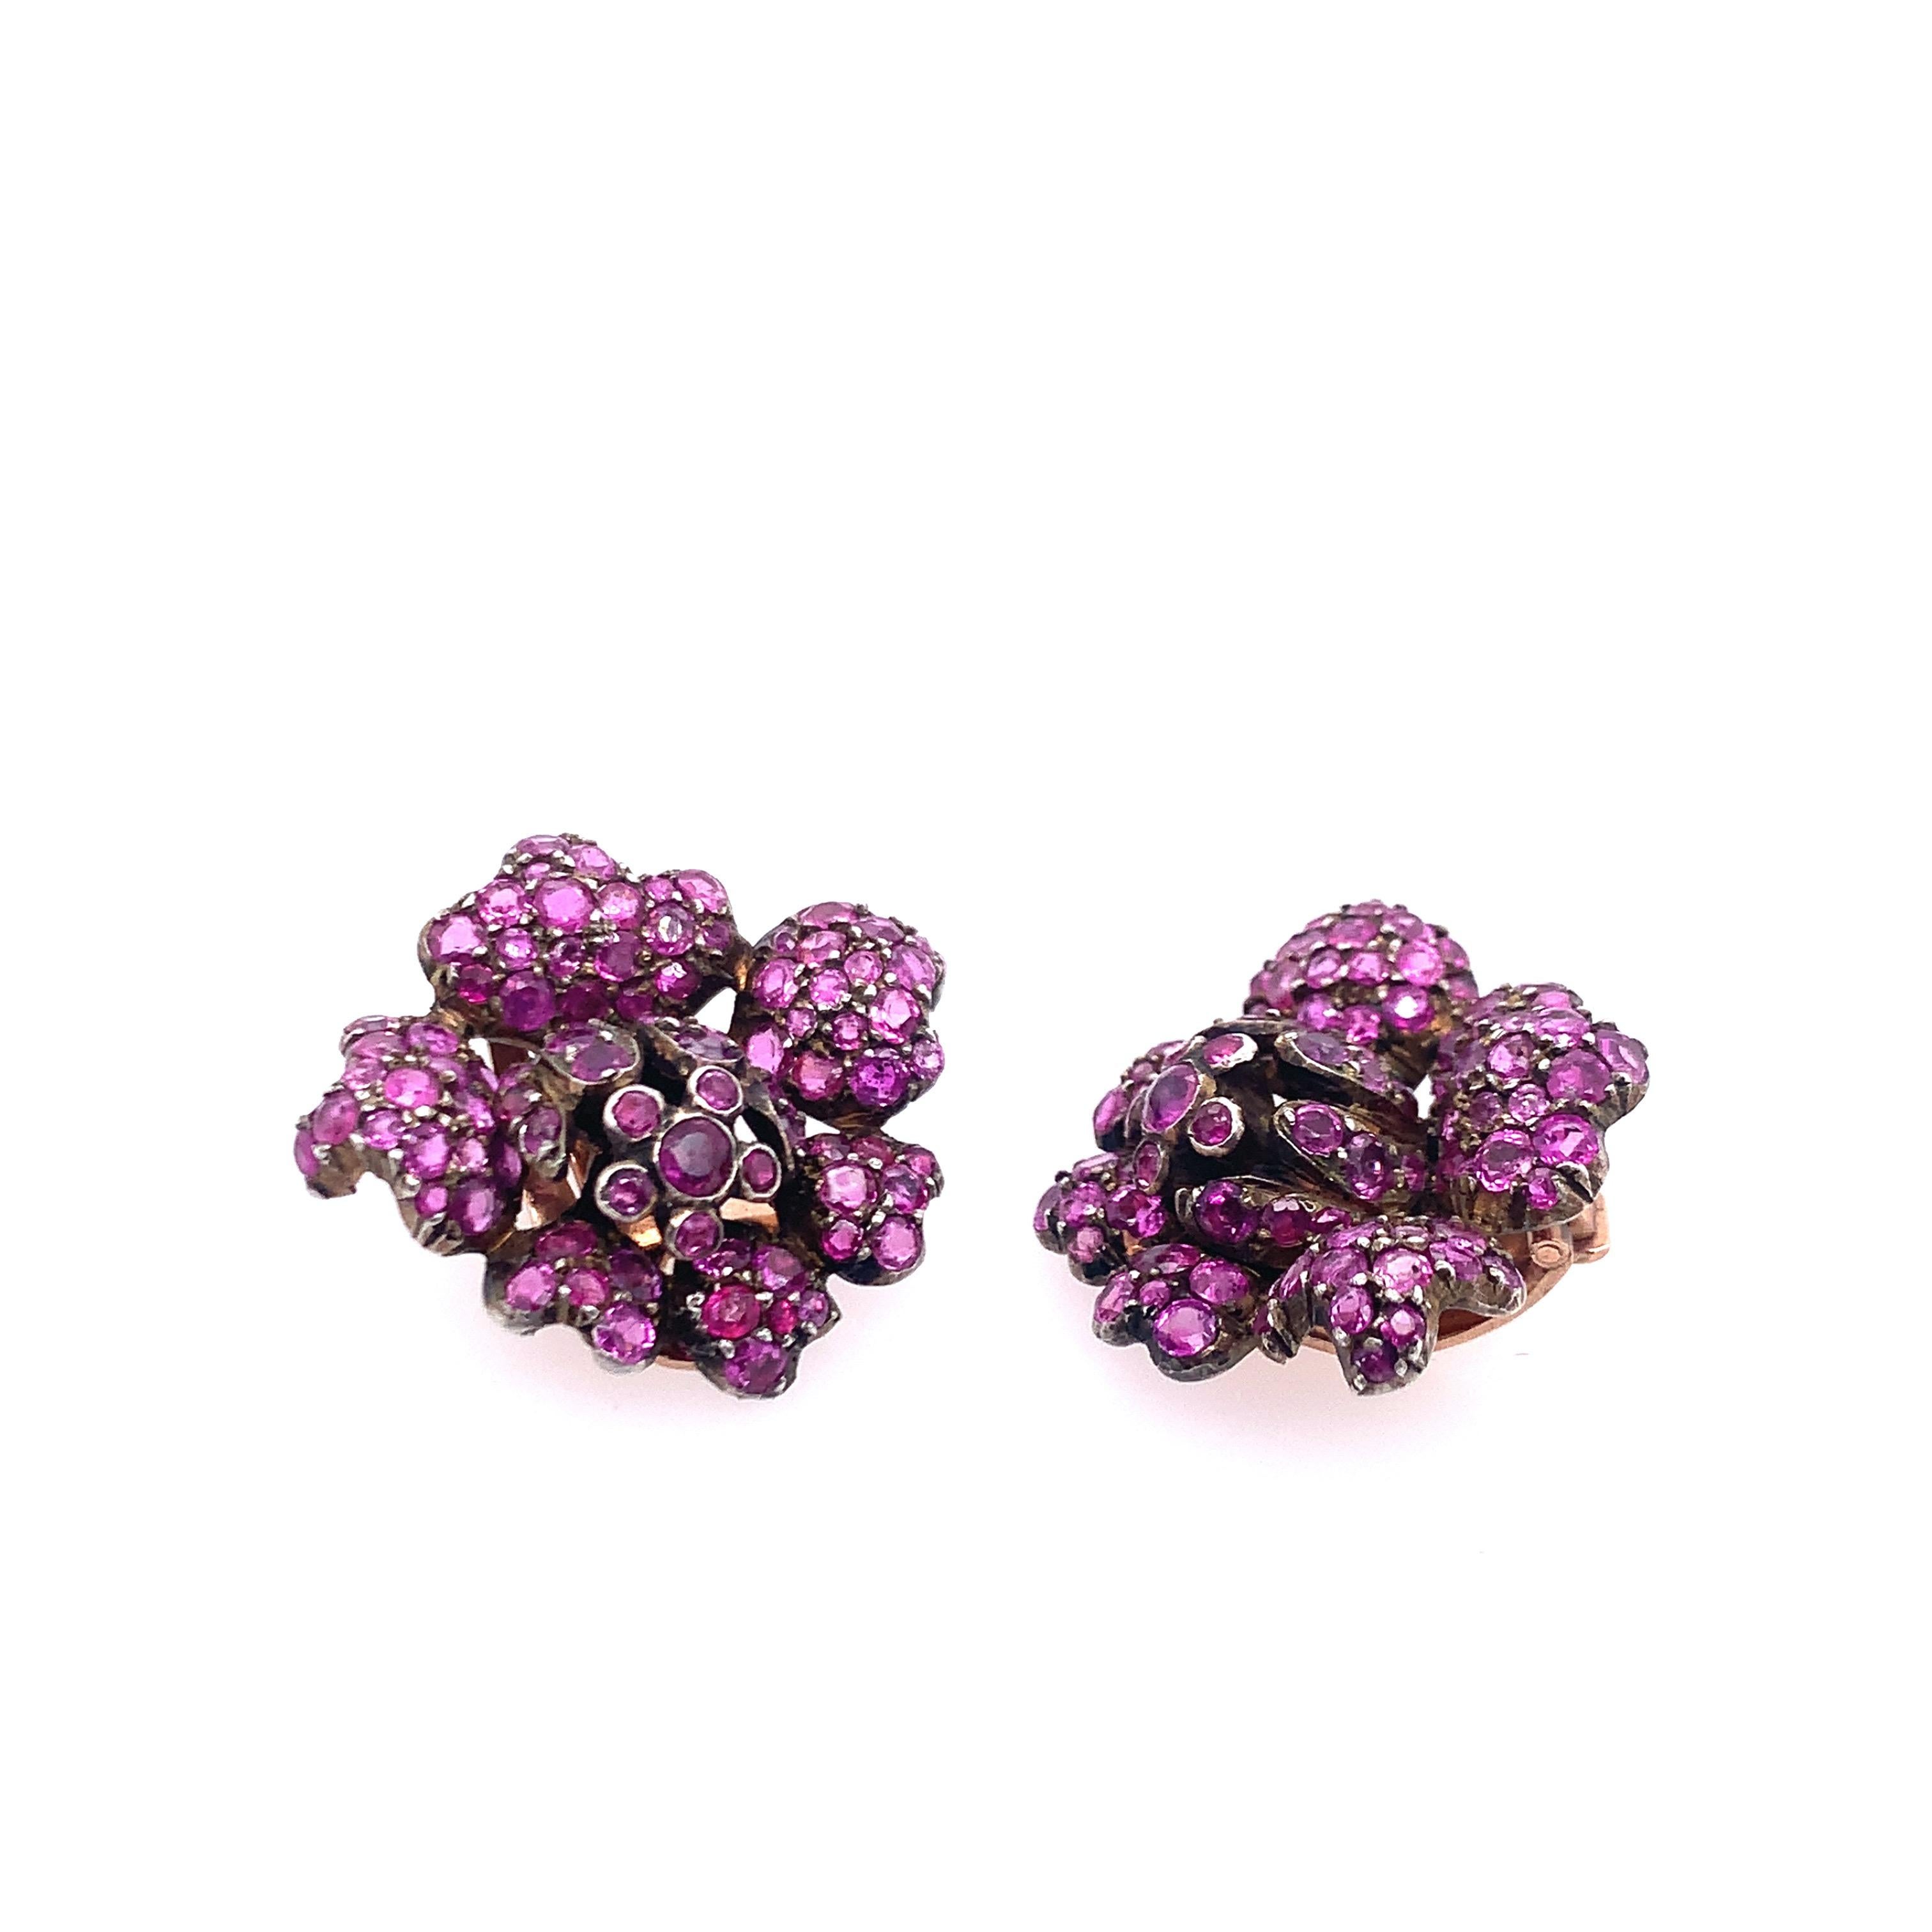 Silver, Low Karat Rose Gold, and Ruby Flower Ear Clips In Good Condition For Sale In New York, NY